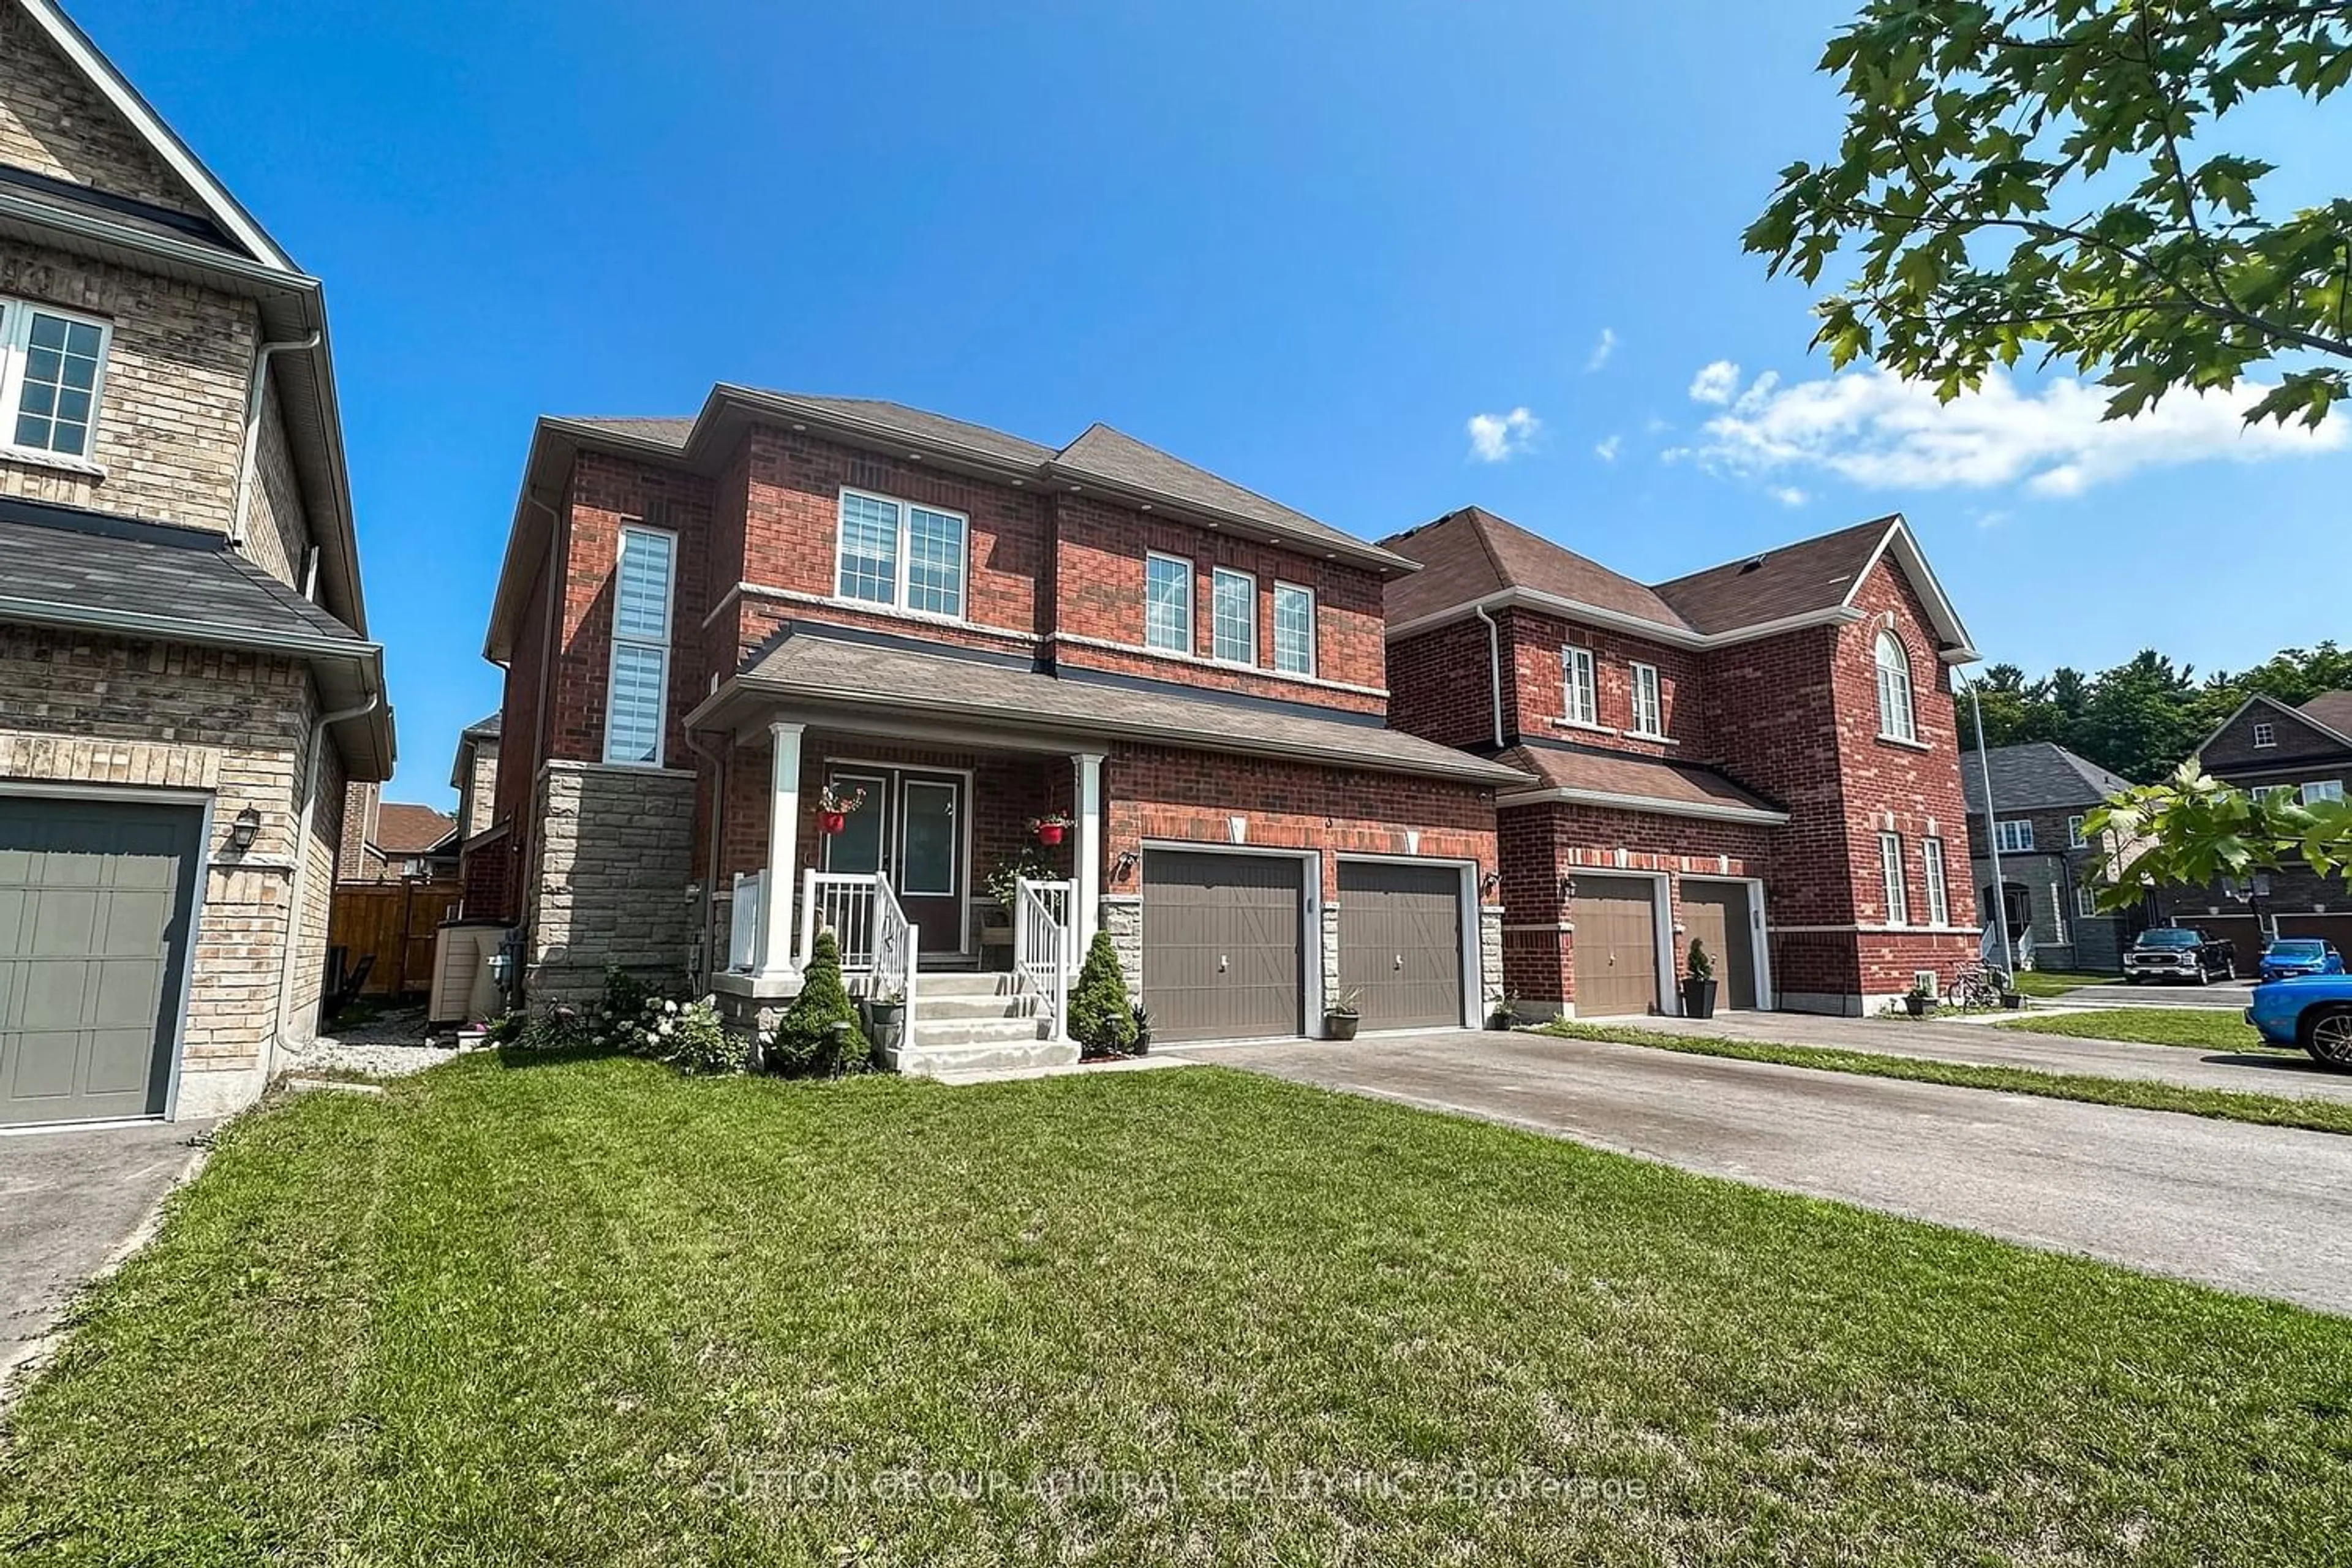 Home with brick exterior material for 3 Cypress Point St, Barrie Ontario L4N 5S4